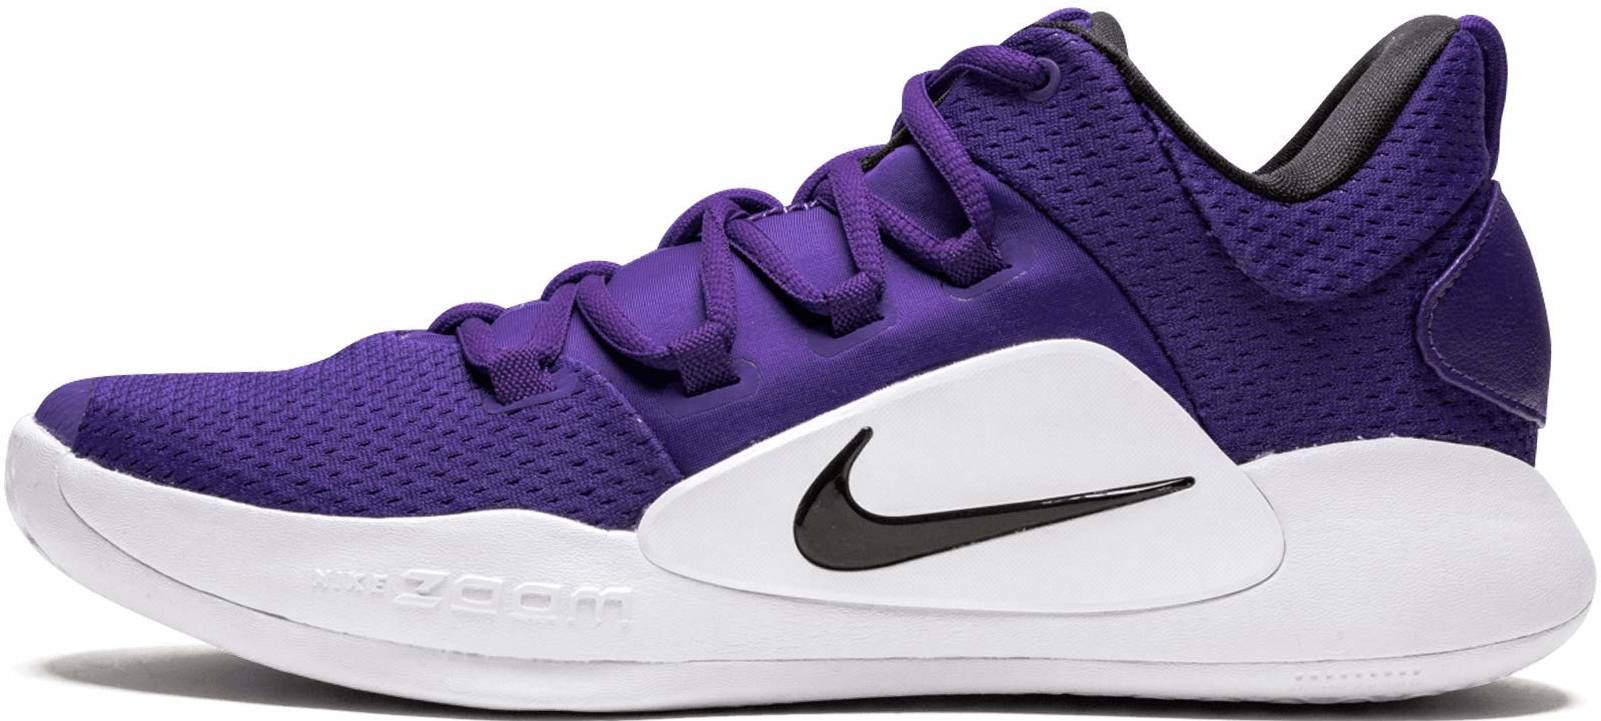 Appearance balcony Playwright Nike Hyperdunk X Low Review 2022, Facts, Deals | RunRepeat